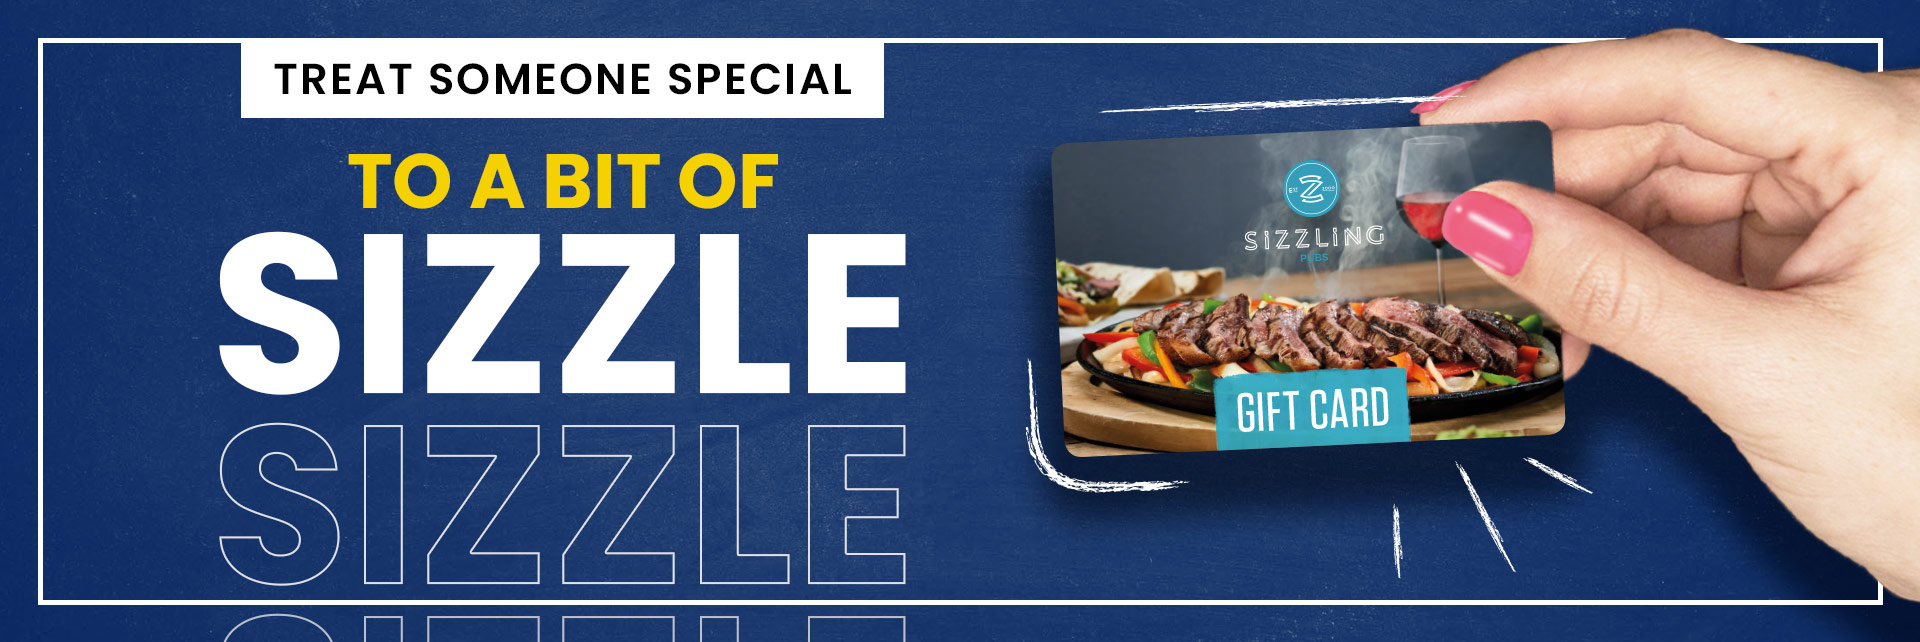 Sizzling Pubs Gift Card at The Four in Hand in Hull